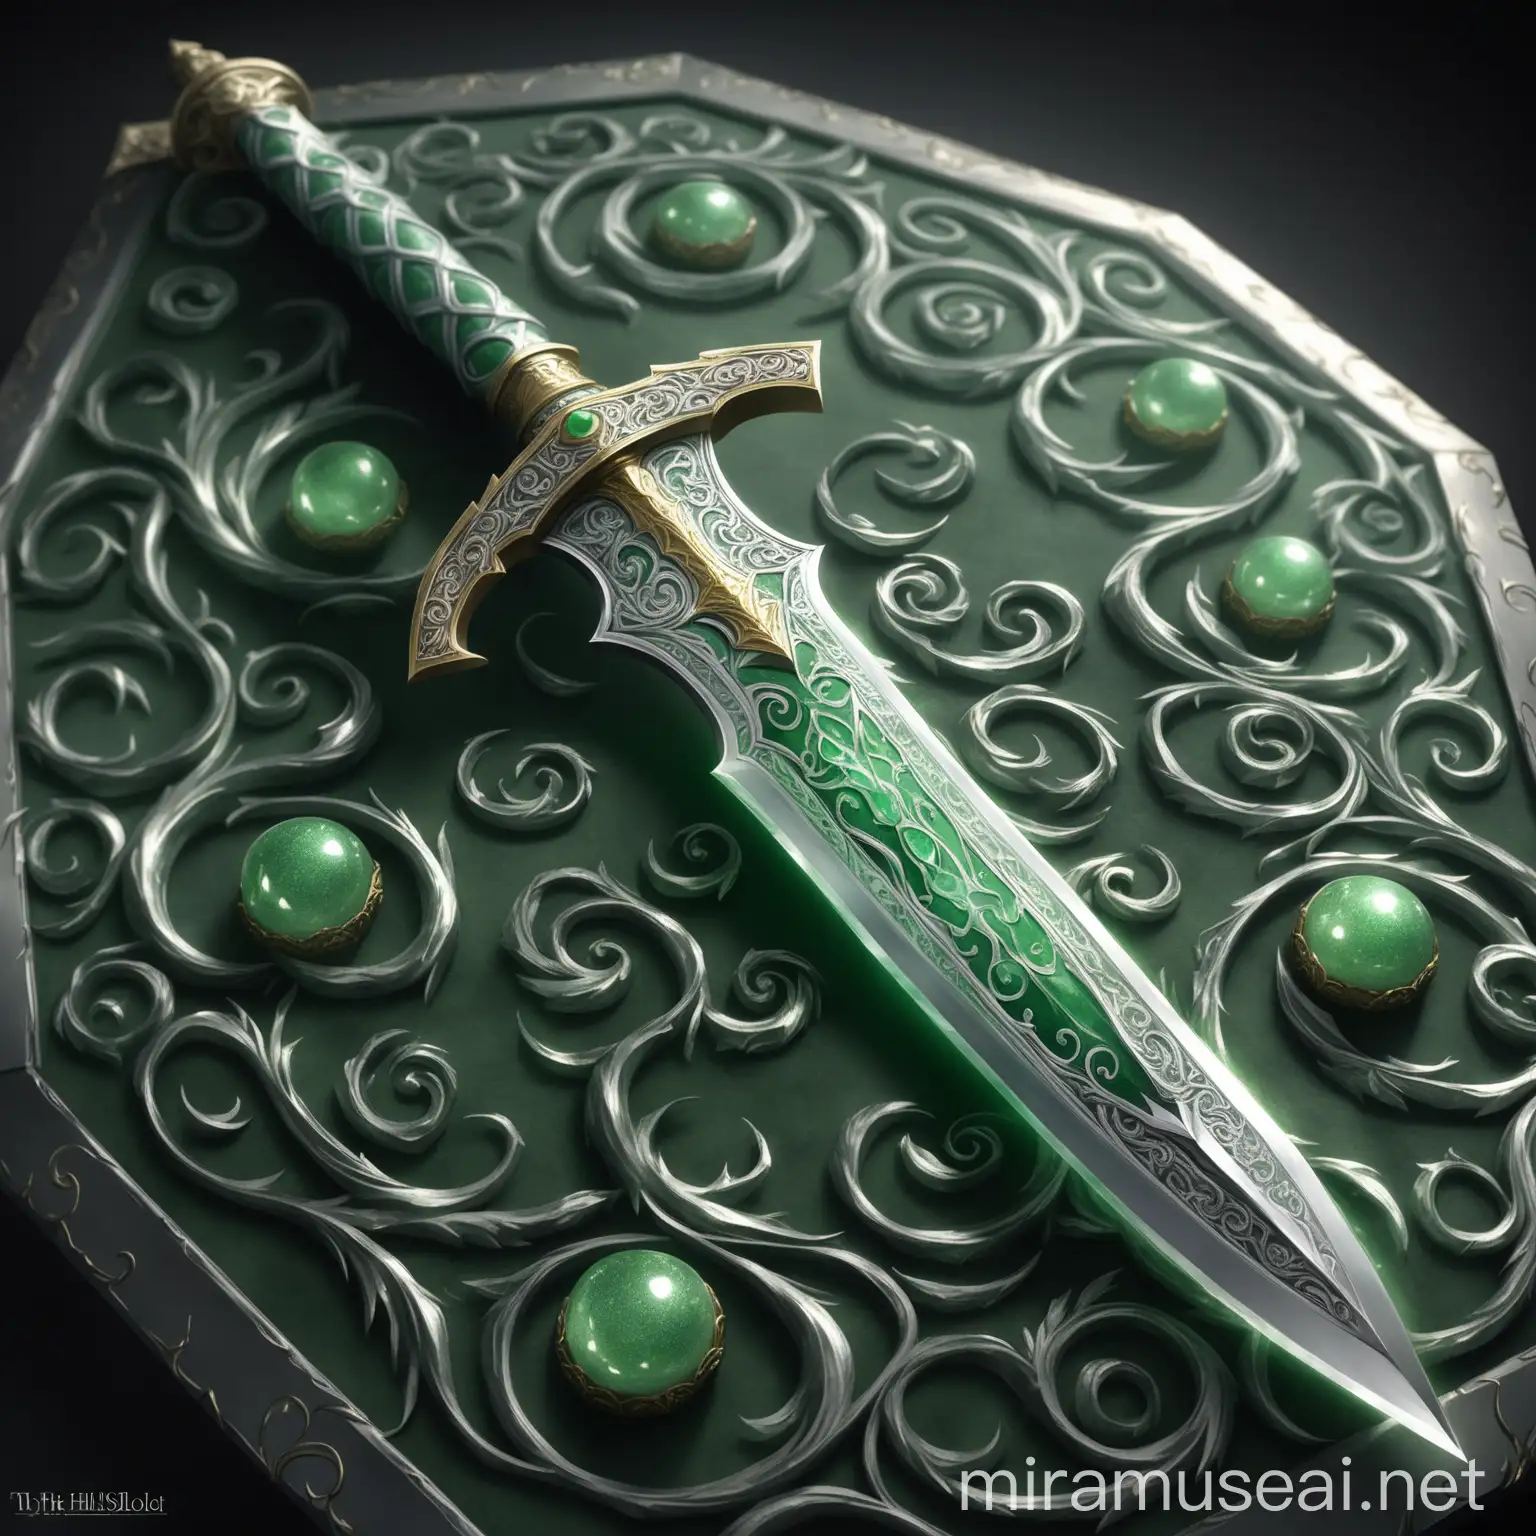 A sleek, ornate dagger with a large curved single-edged blade. The blade is a gleaming, silvery metal that catches the light, making it seem almost ethereal. On the blade's edge is a green shimmer indicating its poisonous nature. The hilt is intricately designed with swirling patterns of silver and gold. At the center of the hilt, just above the guard, lies a perfectly cut, hexagonal slot. In the gemslot is a green jade of medium quality. dnd, photorealistic, fantasy